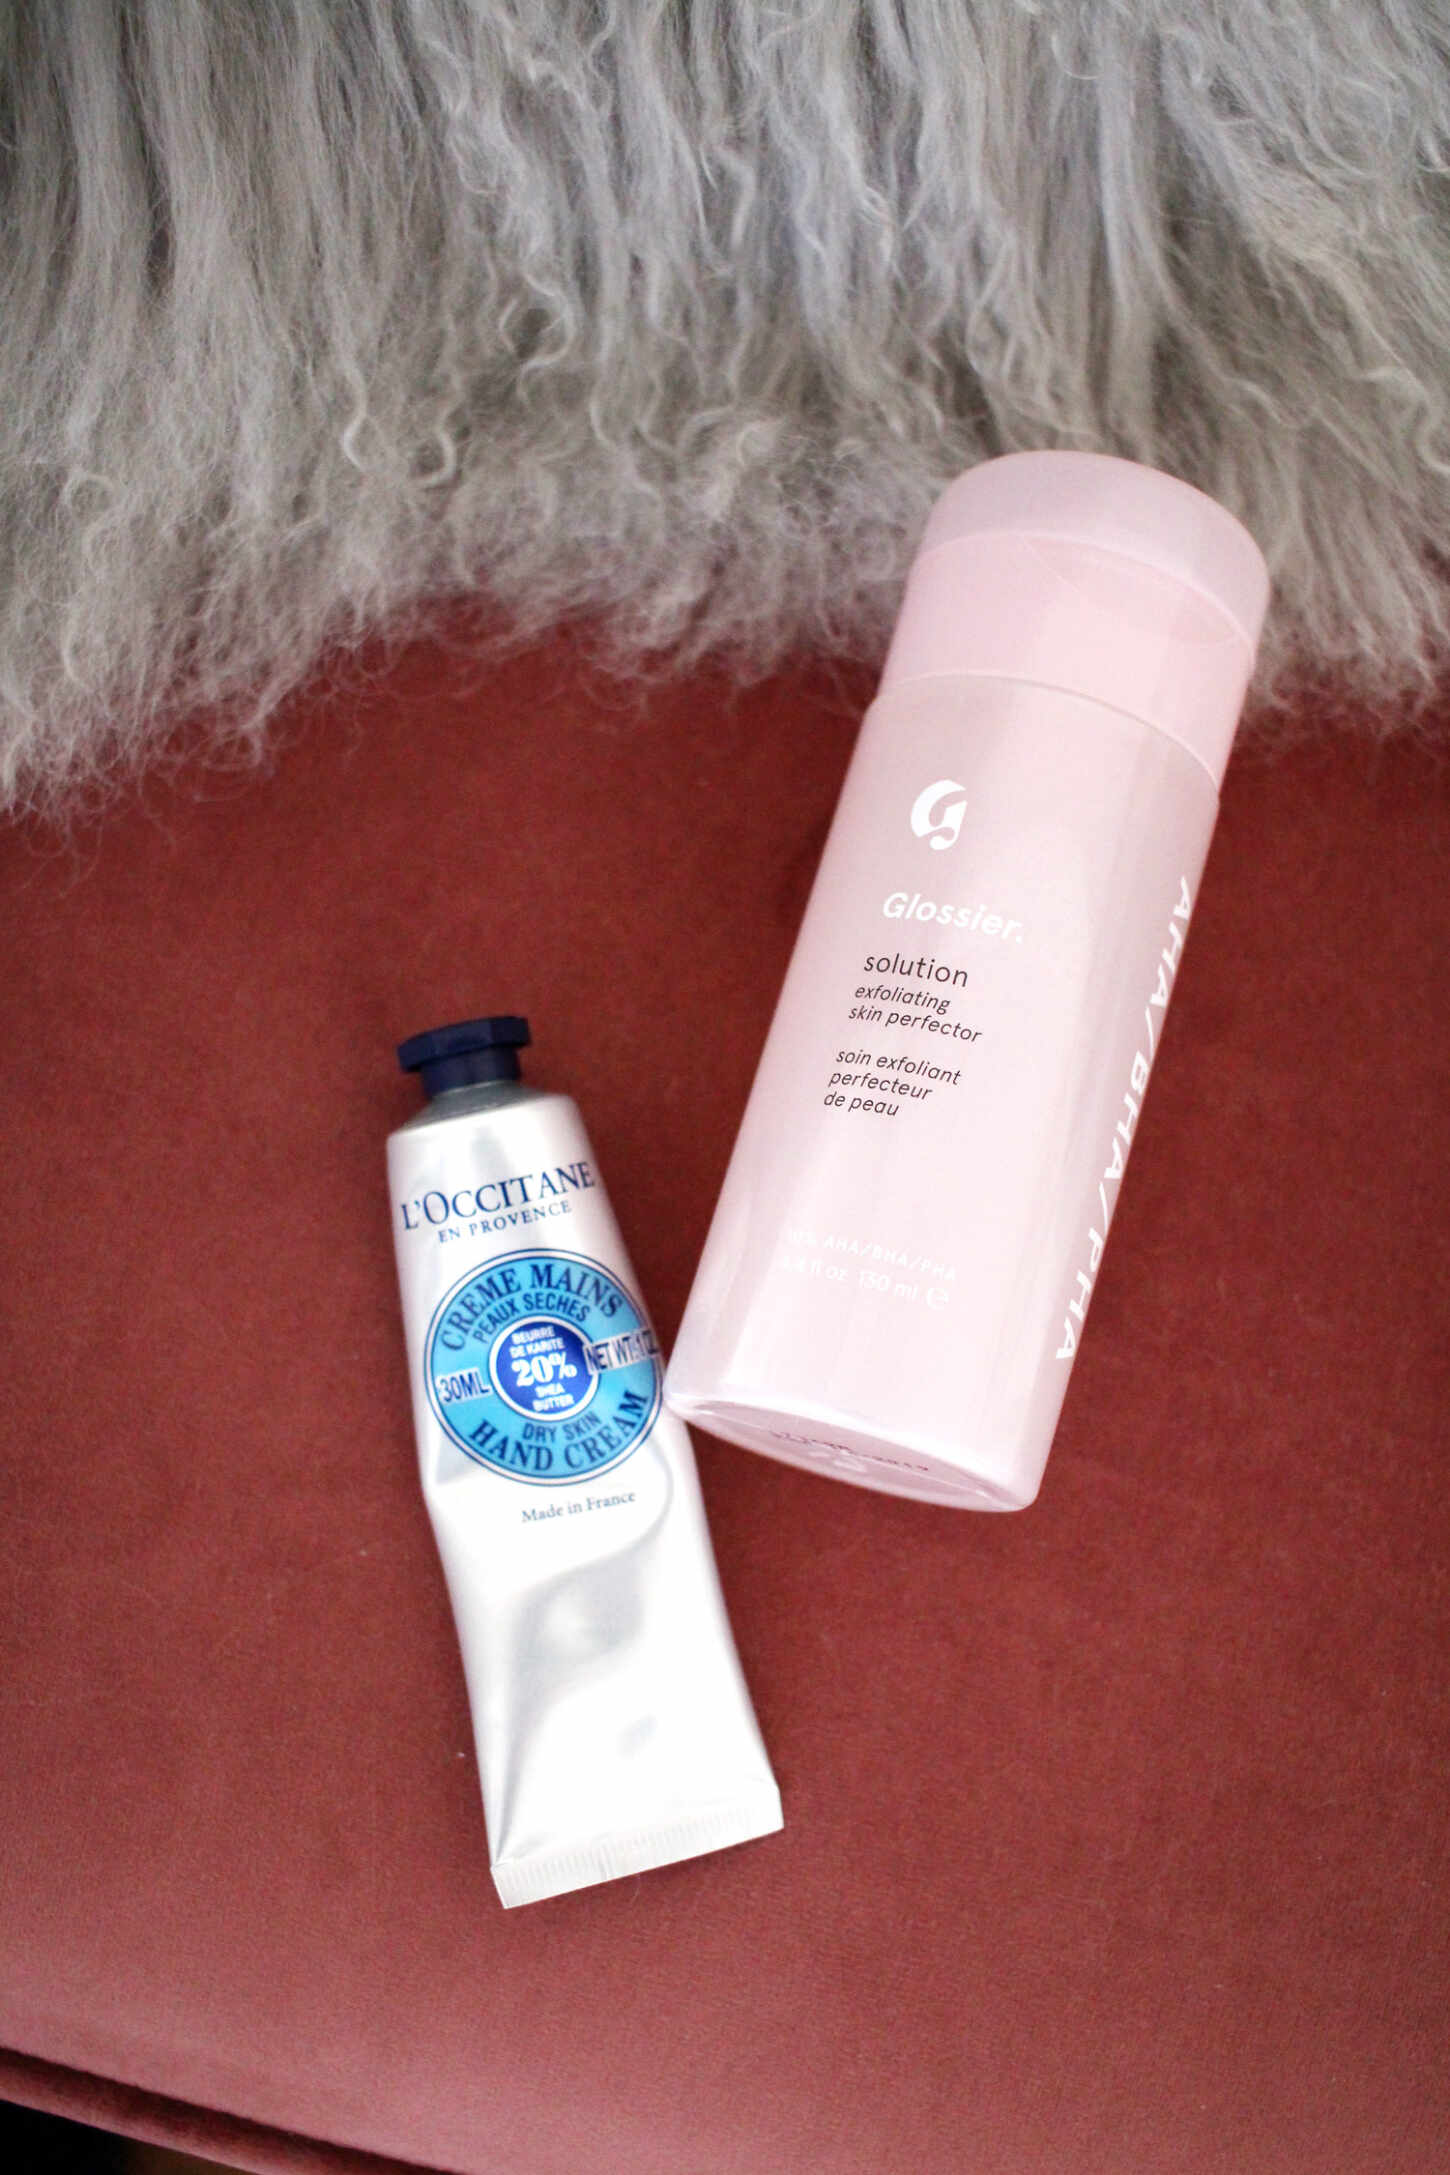 january-beauty-favourites-2018-glossier-exfoliating-solution-toner-1